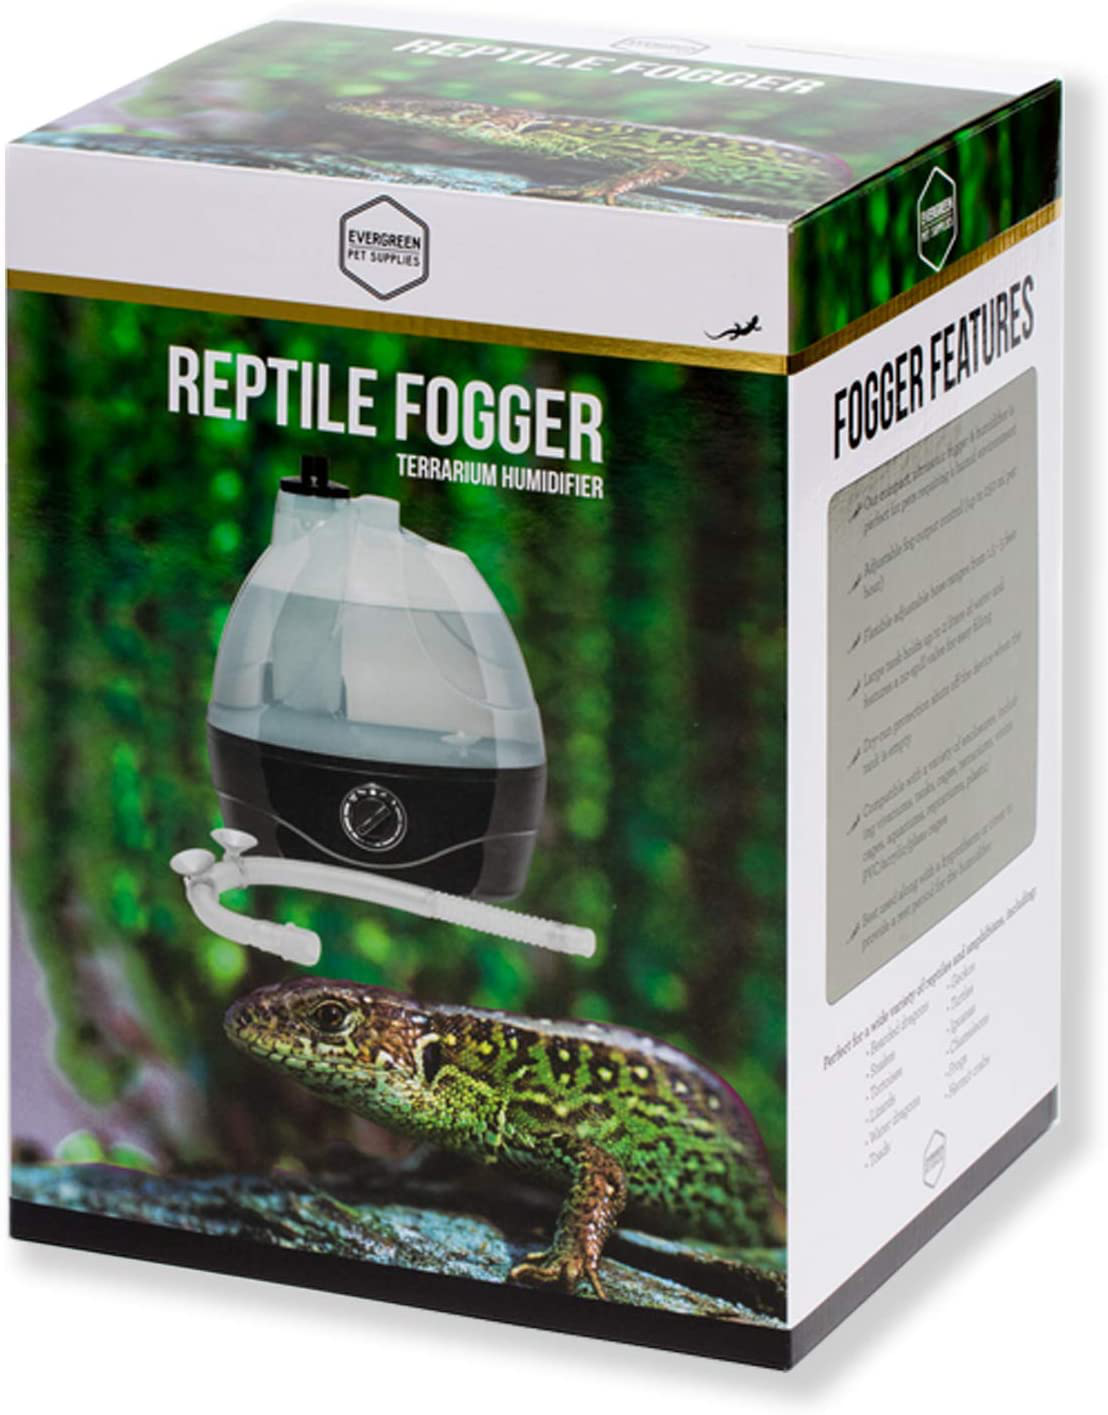 Reptile Humidifier / Fogger - Large Tank - Ideal for a Variety of Reptiles / Amphibians / Herps - Compatible with All Terrariums and Enclosures - by Evergreen Pet Supplies Animals & Pet Supplies > Pet Supplies > Reptile & Amphibian Supplies > Reptile & Amphibian Substrates Evergreen Pet Supplies   